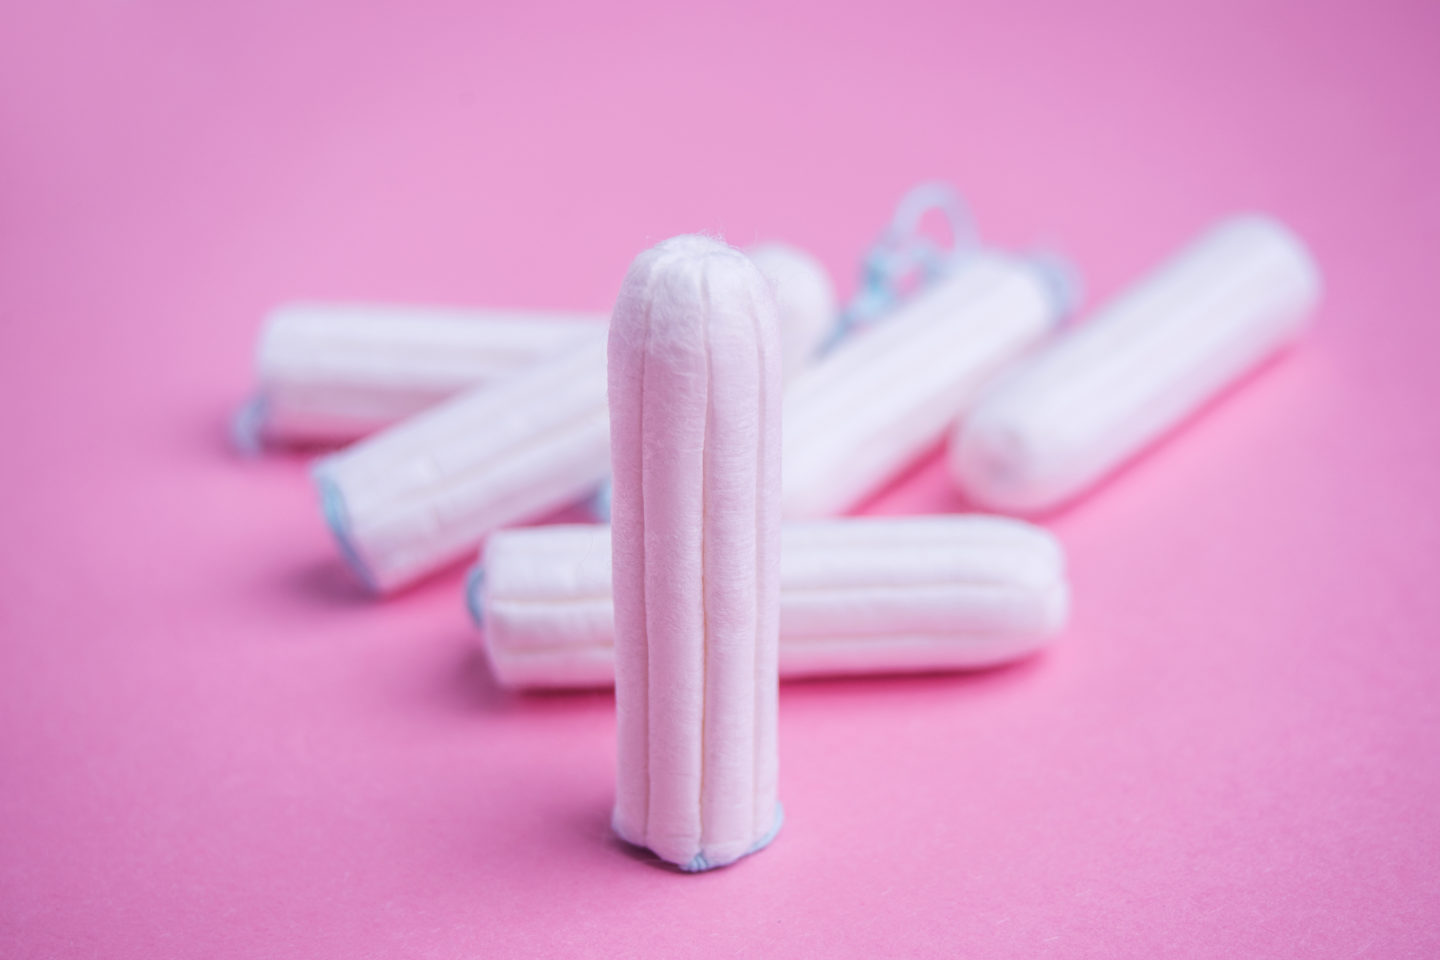 Period Sex on the First Date: Do You Consider it Taboo?